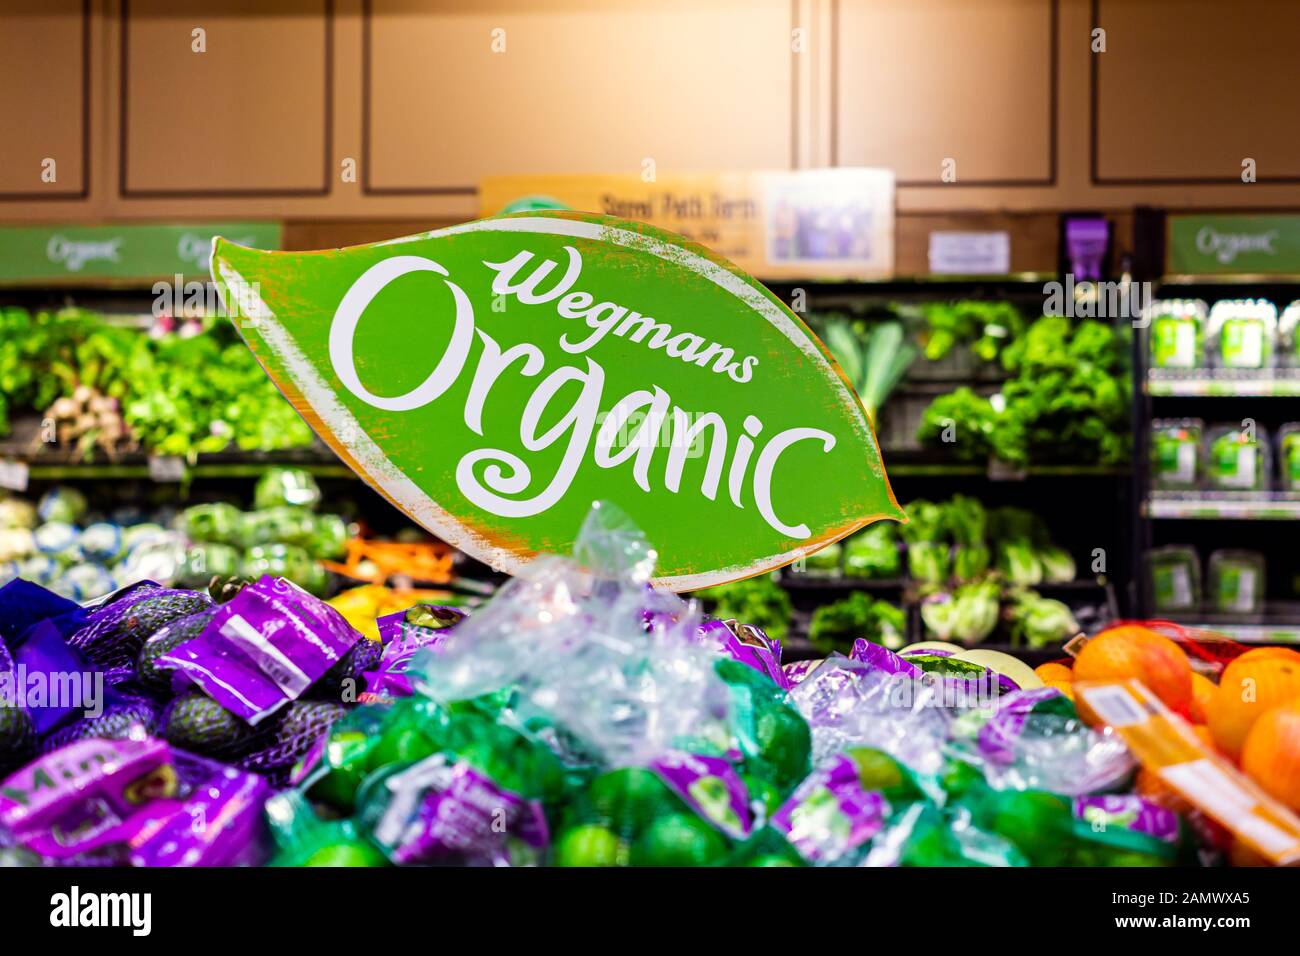 Fairfax, USA - December 5, 2019: Wegmans grocery store interior with organic sign text in produce aisle with vegetables fruits Stock Photo